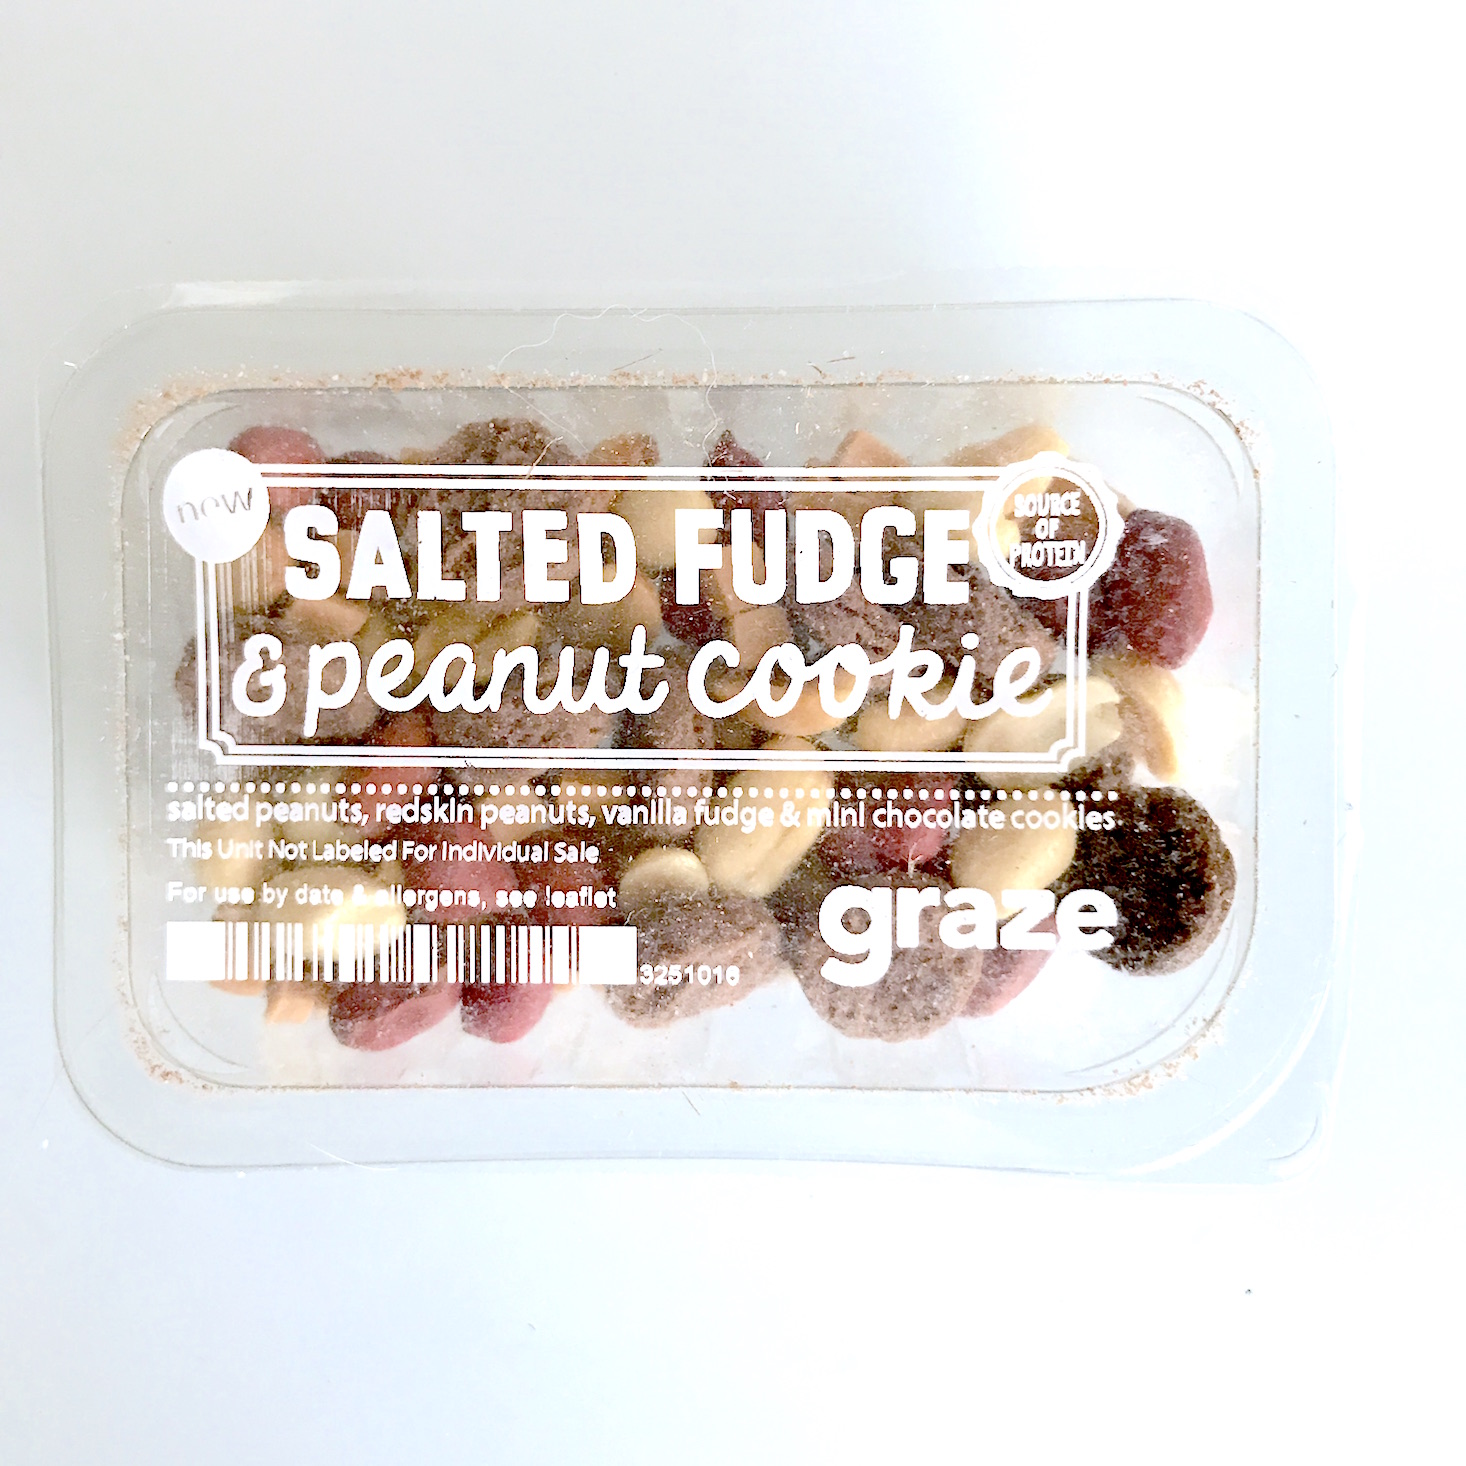 Graze March 2018 - salted fudge and peanut cookie